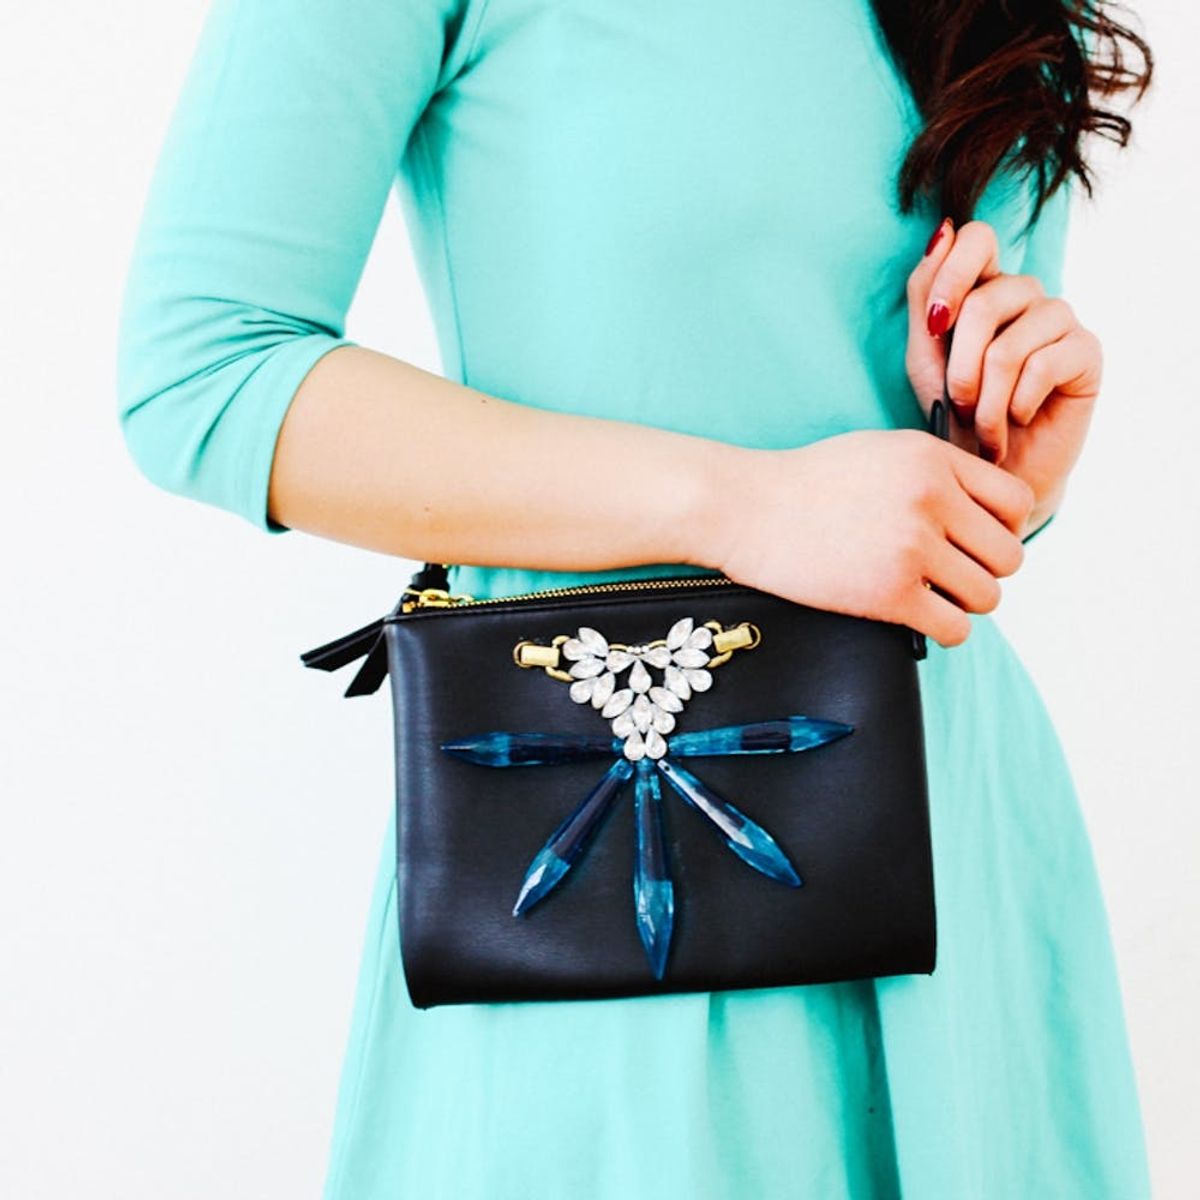 How to Upgrade a Boring Purse With Easy Embellishments in Just 3 Steps